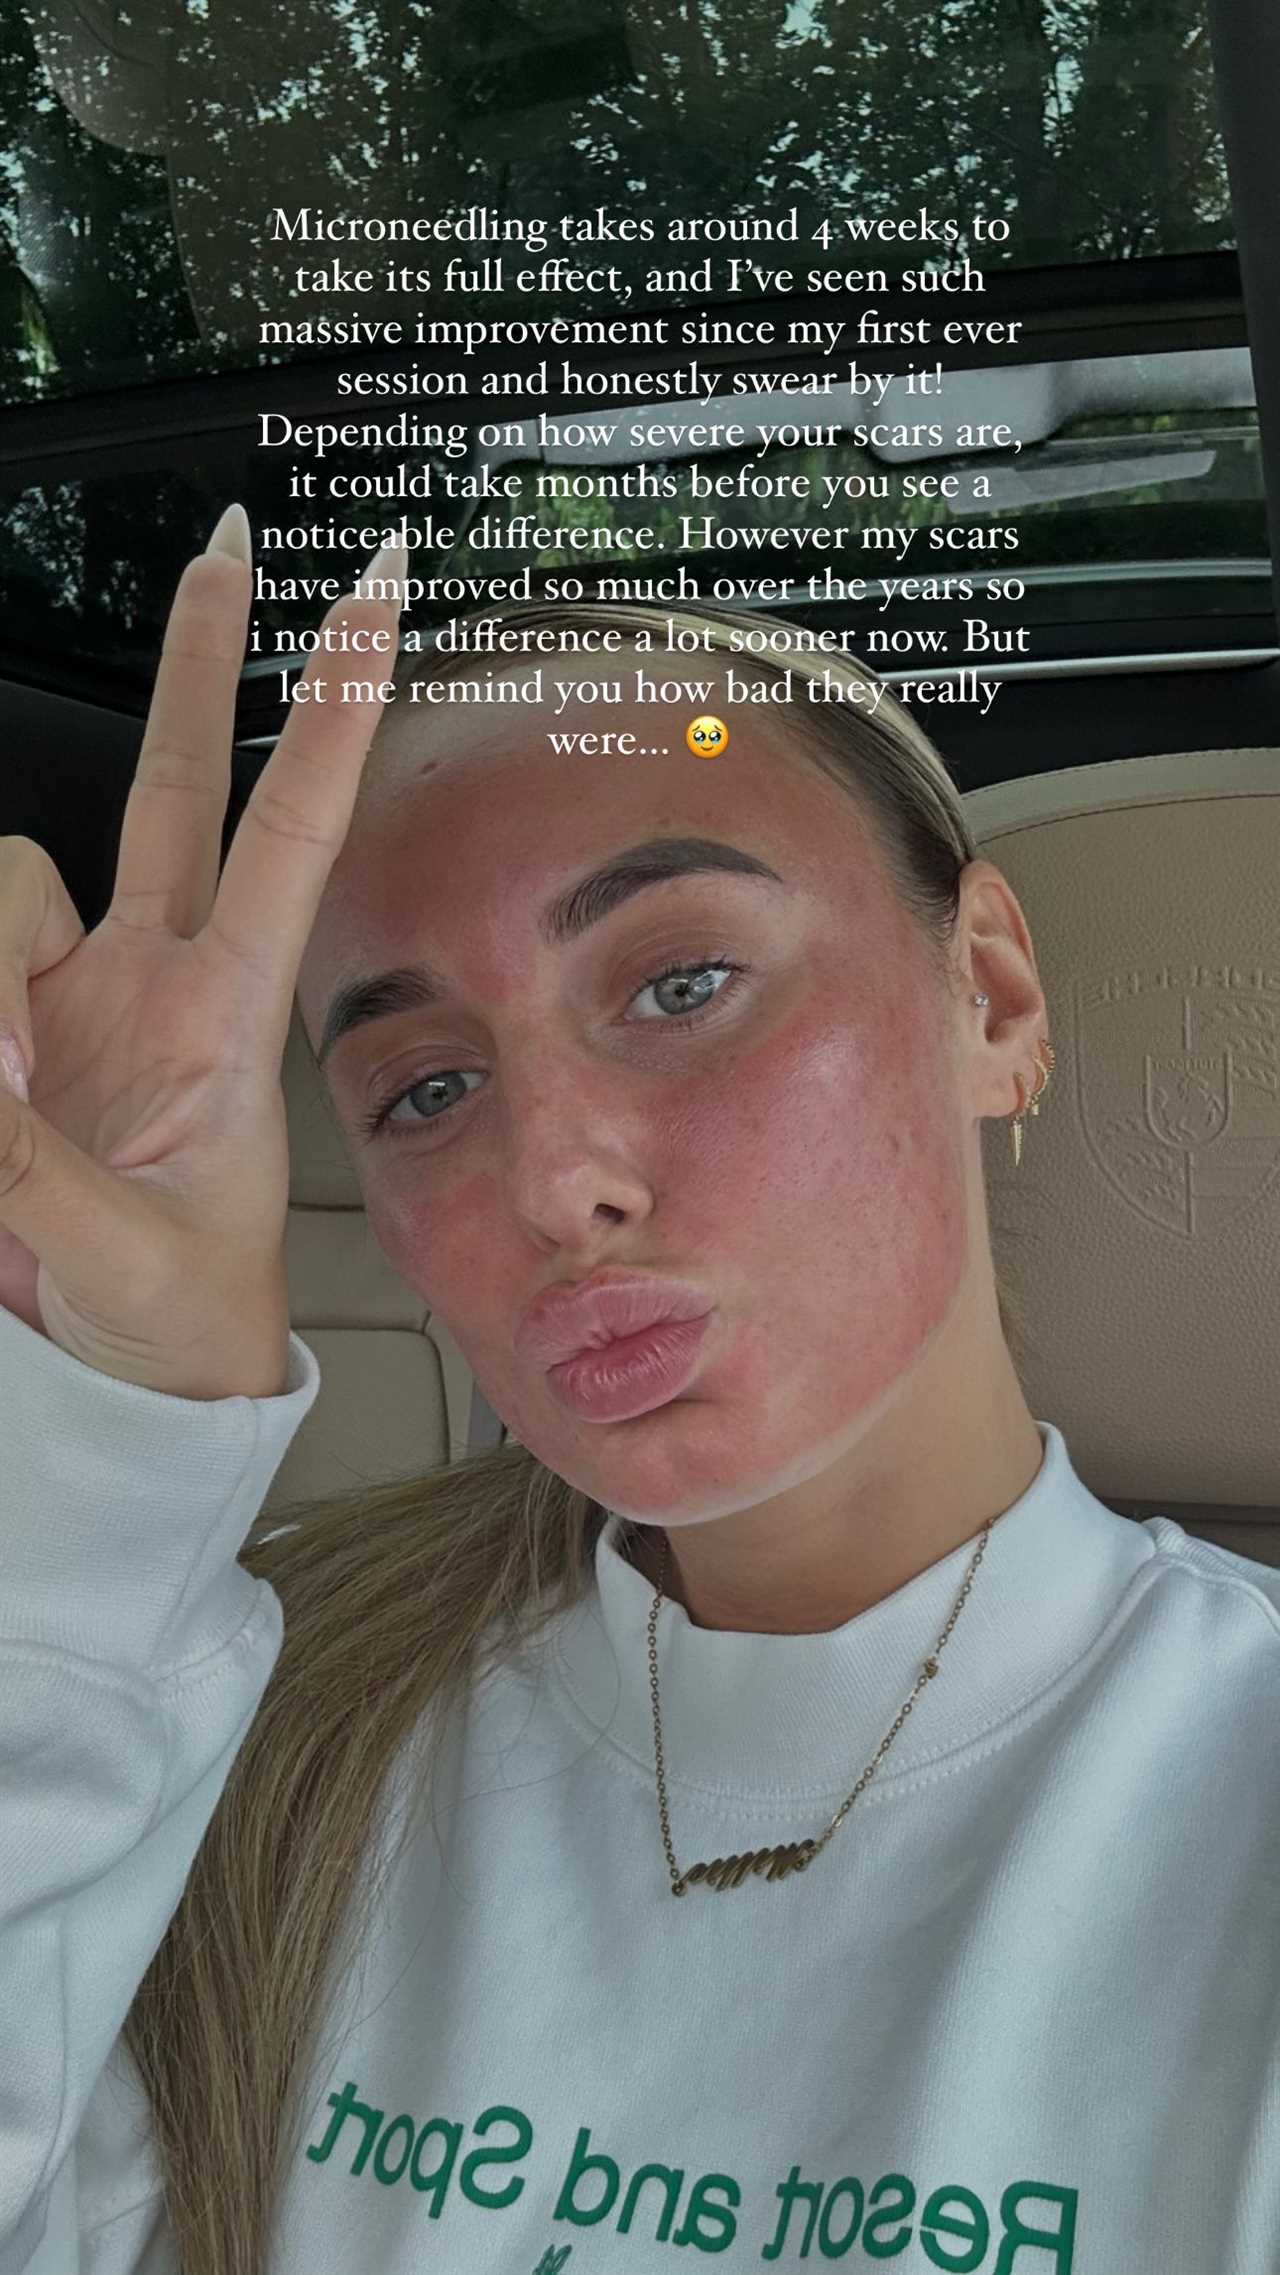 Love Island’s Millie Court reveals her ‘real’ skin after decade-long battle with acne